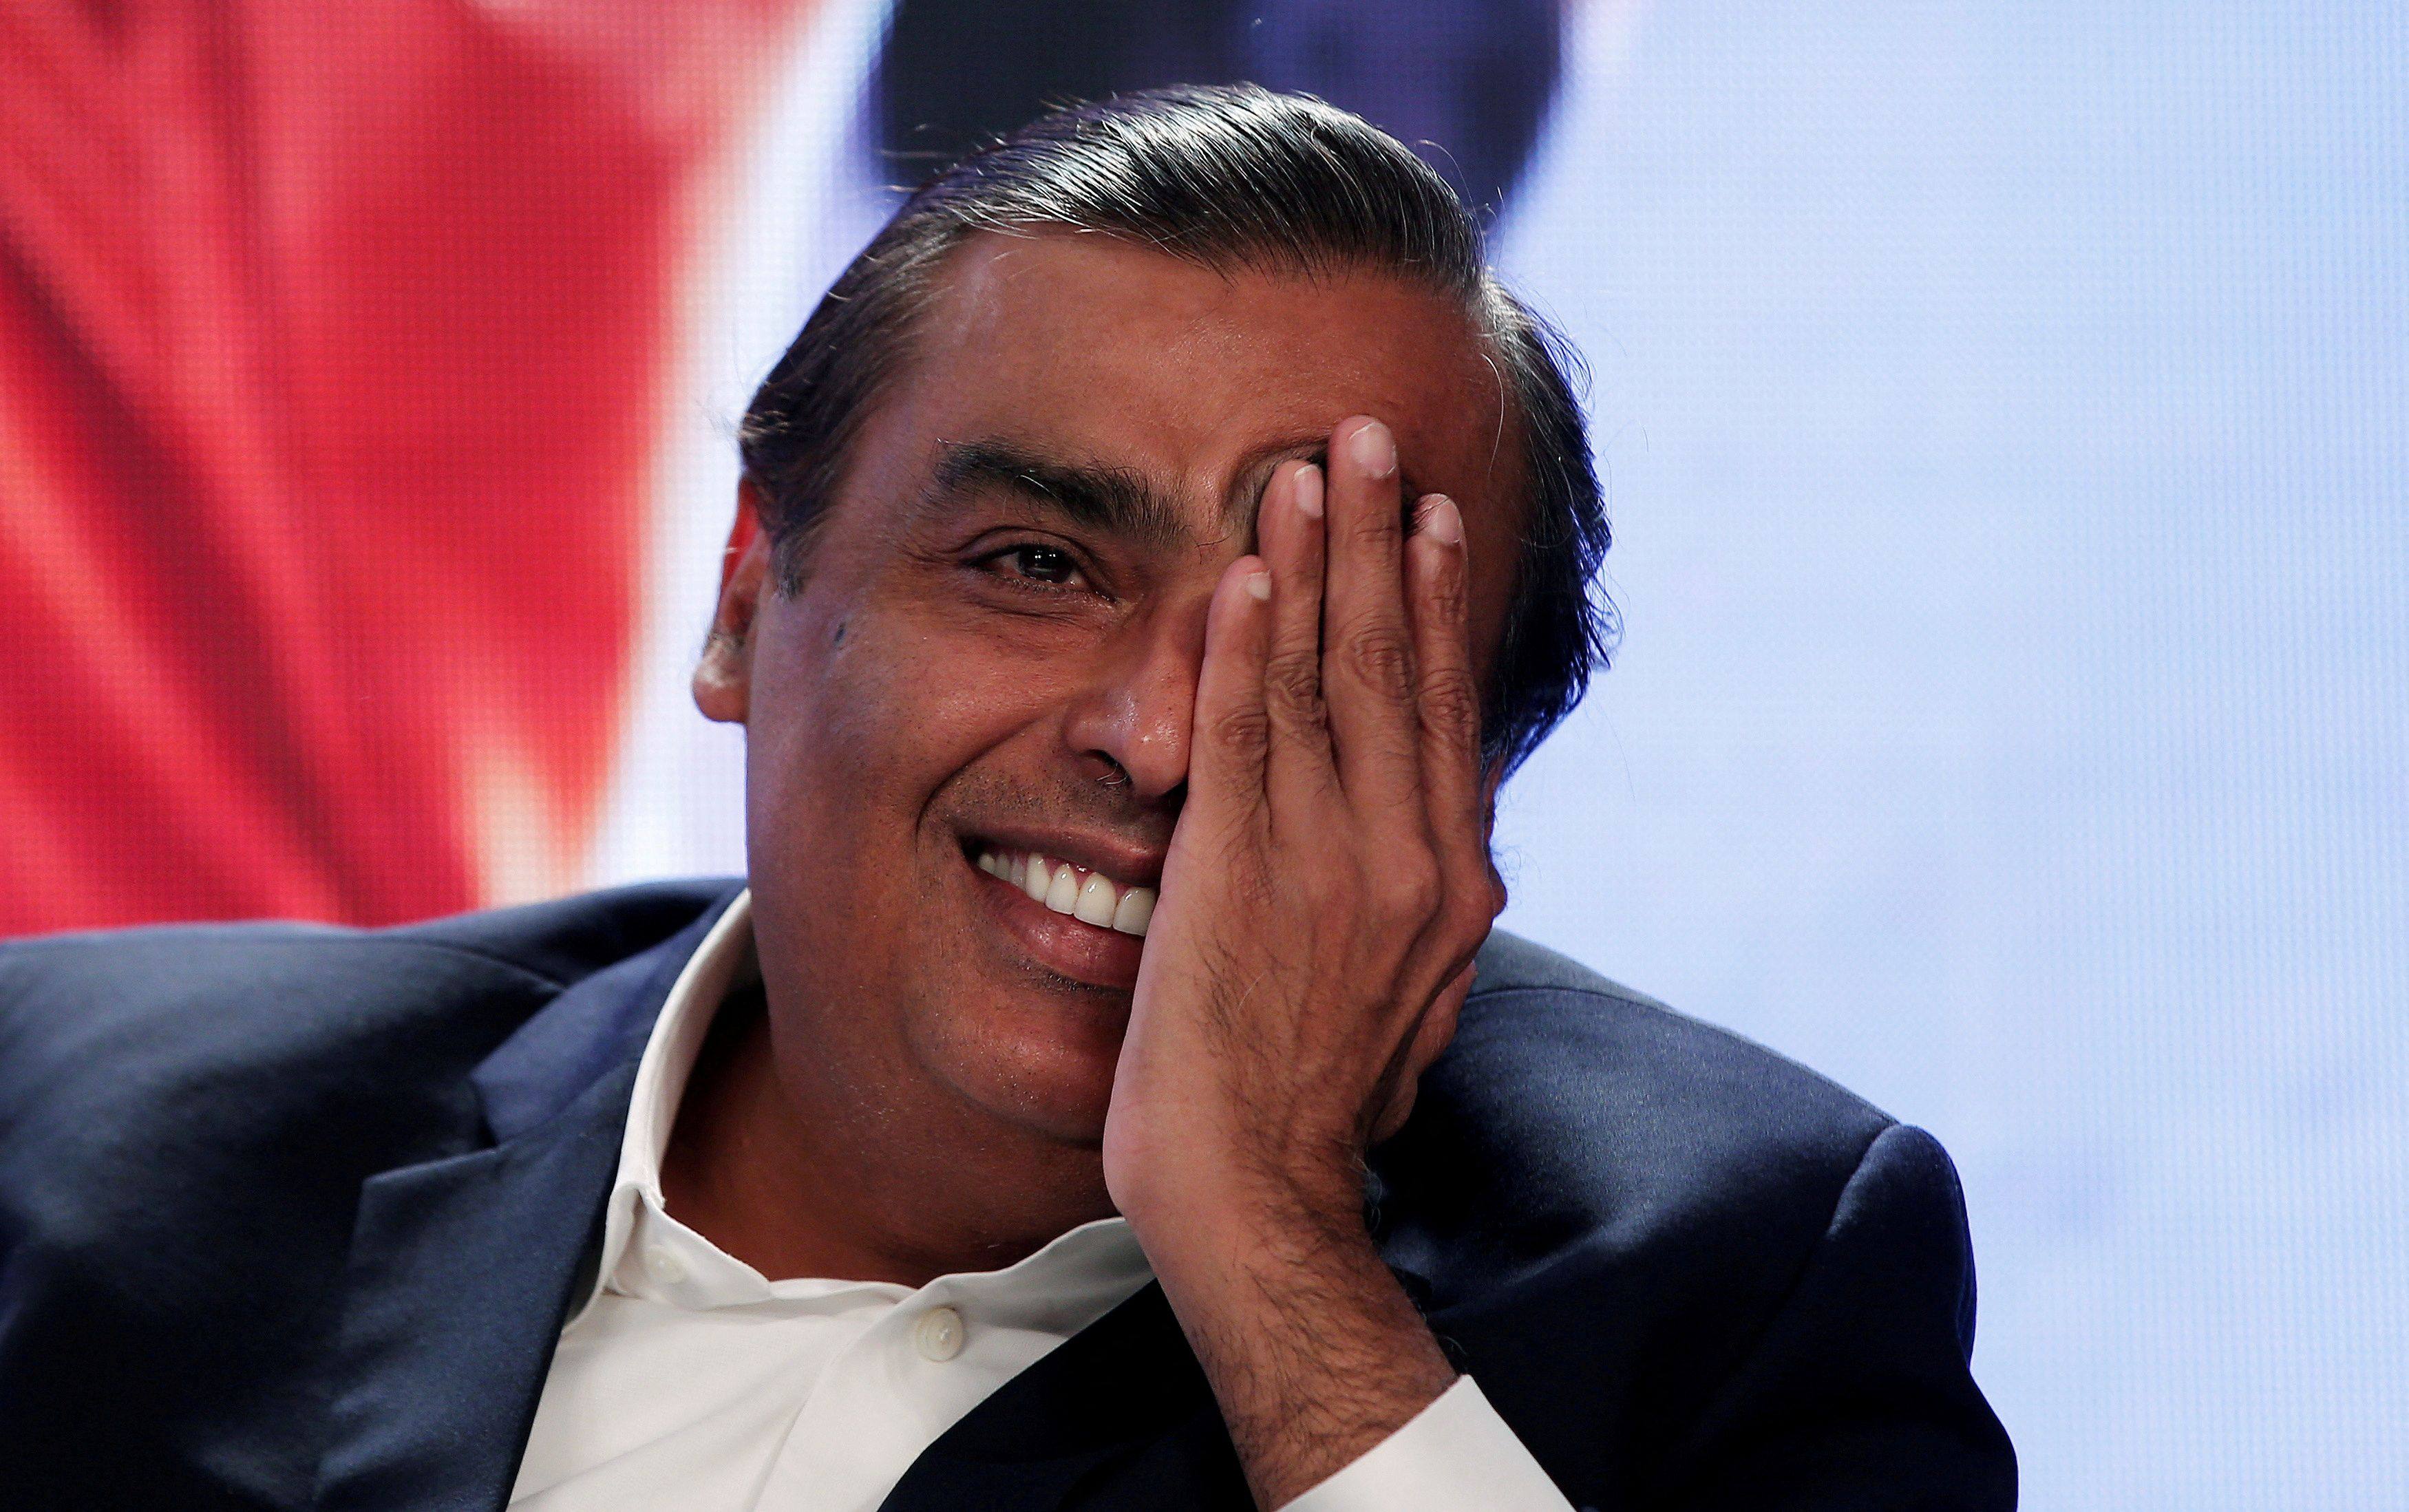 Mukesh Ambani, chairman and managing director of Reliance Industries, pictured at an event in New Delhi in 2017. Photo: Reuters